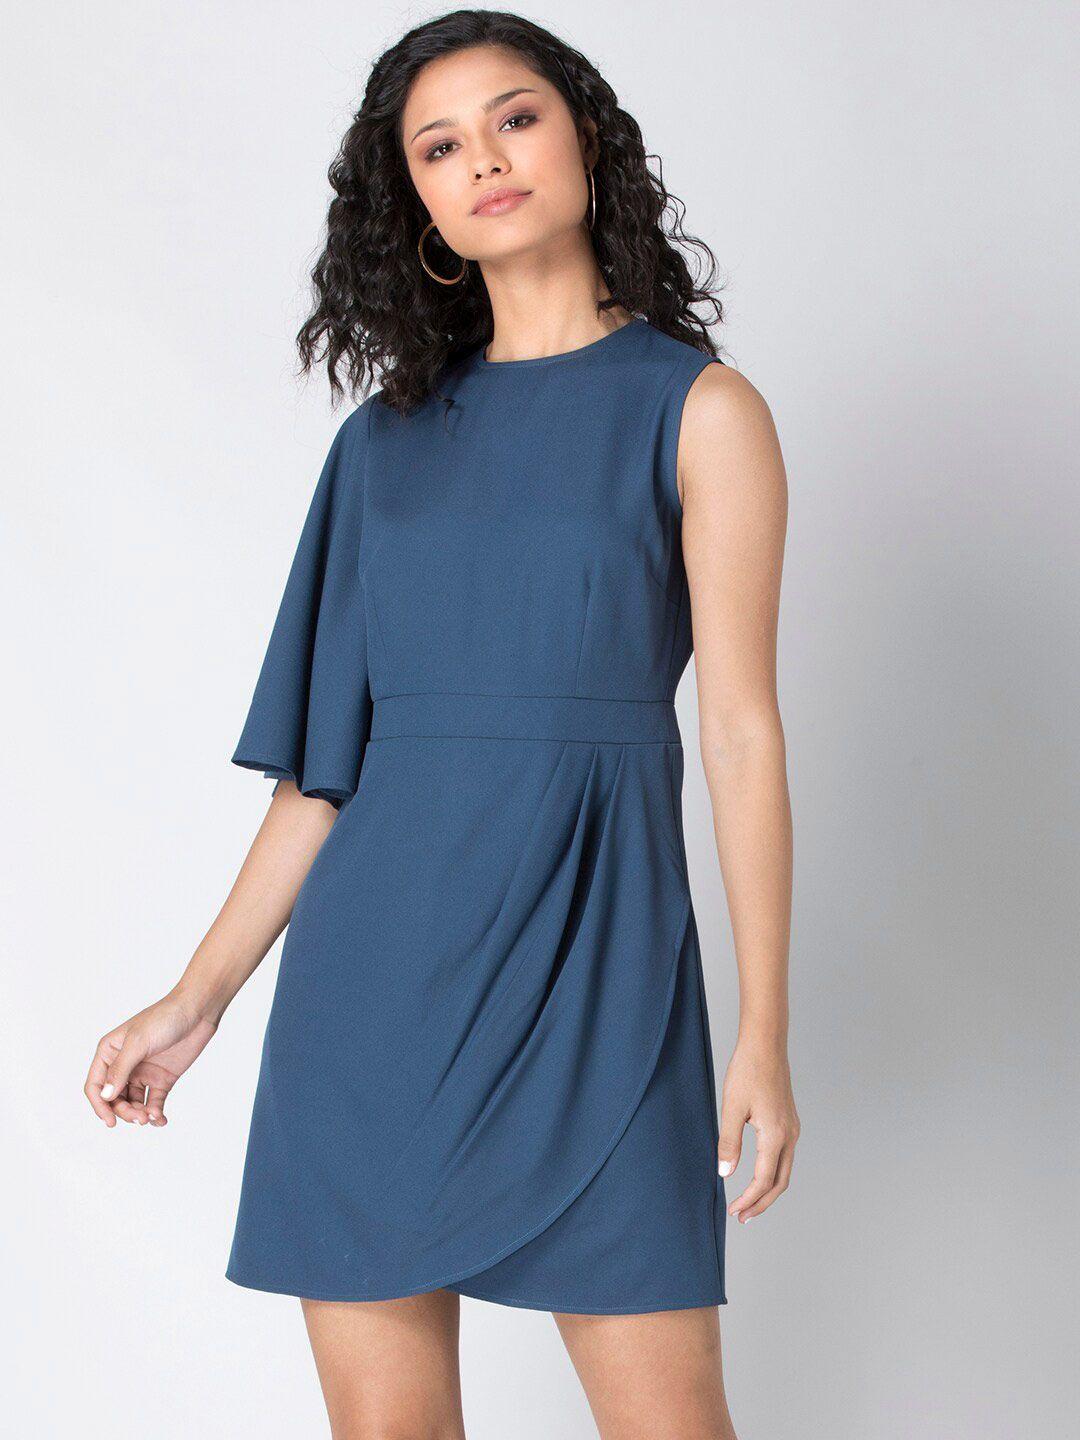 faballey round neck one sleeve a-line dress